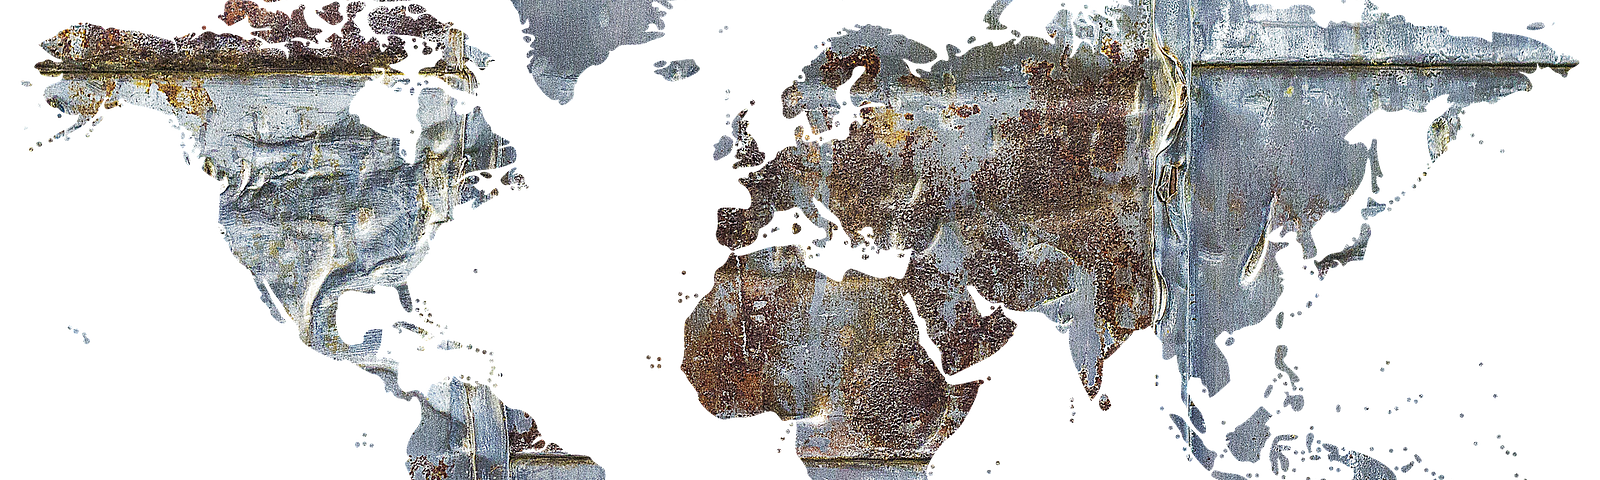 Decorative image of a map in blue and brown paint